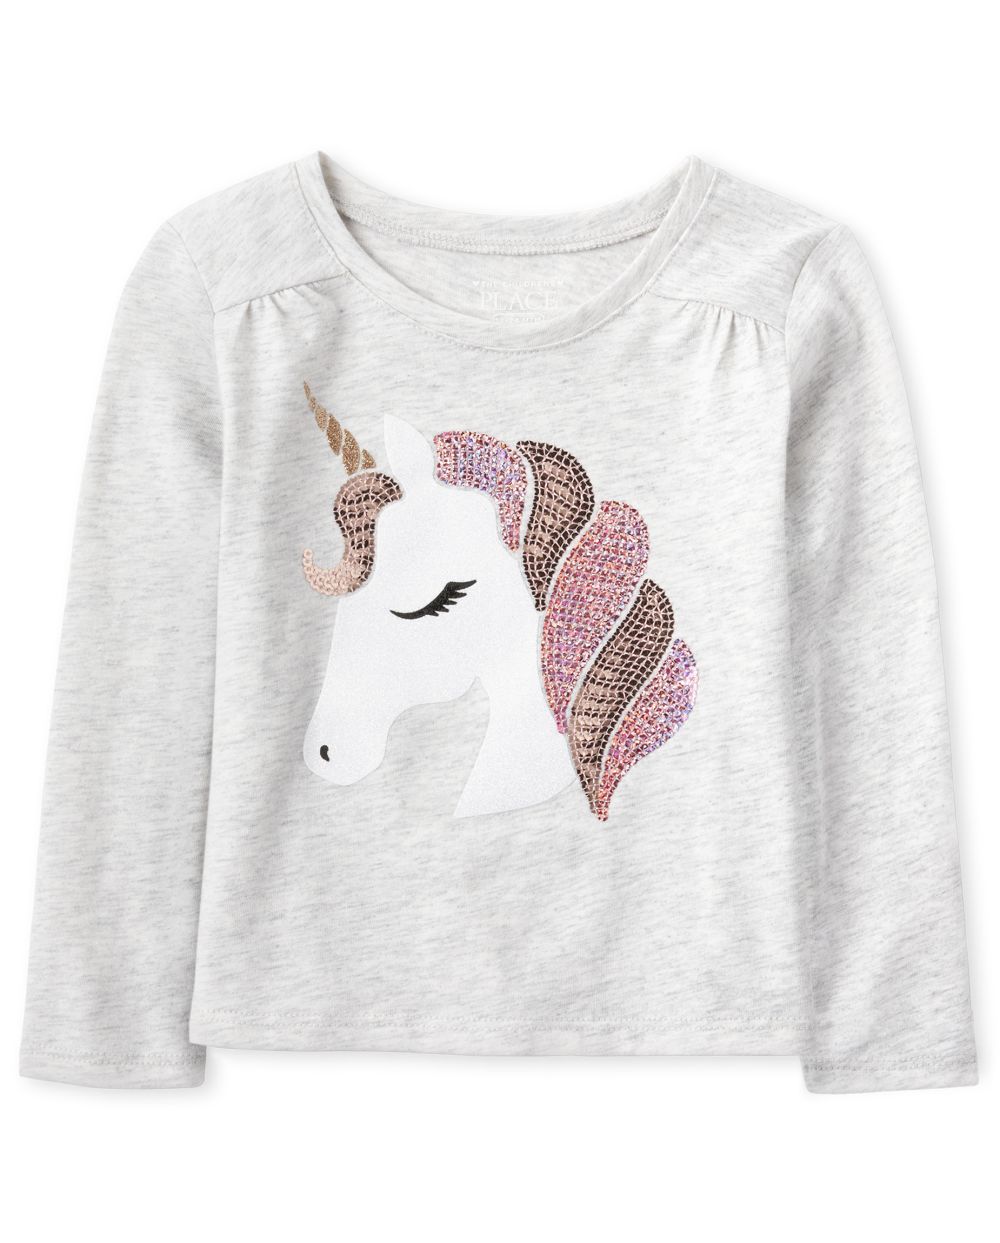 Baby And Toddler Girls Long Sleeve Embellished Graphic Top